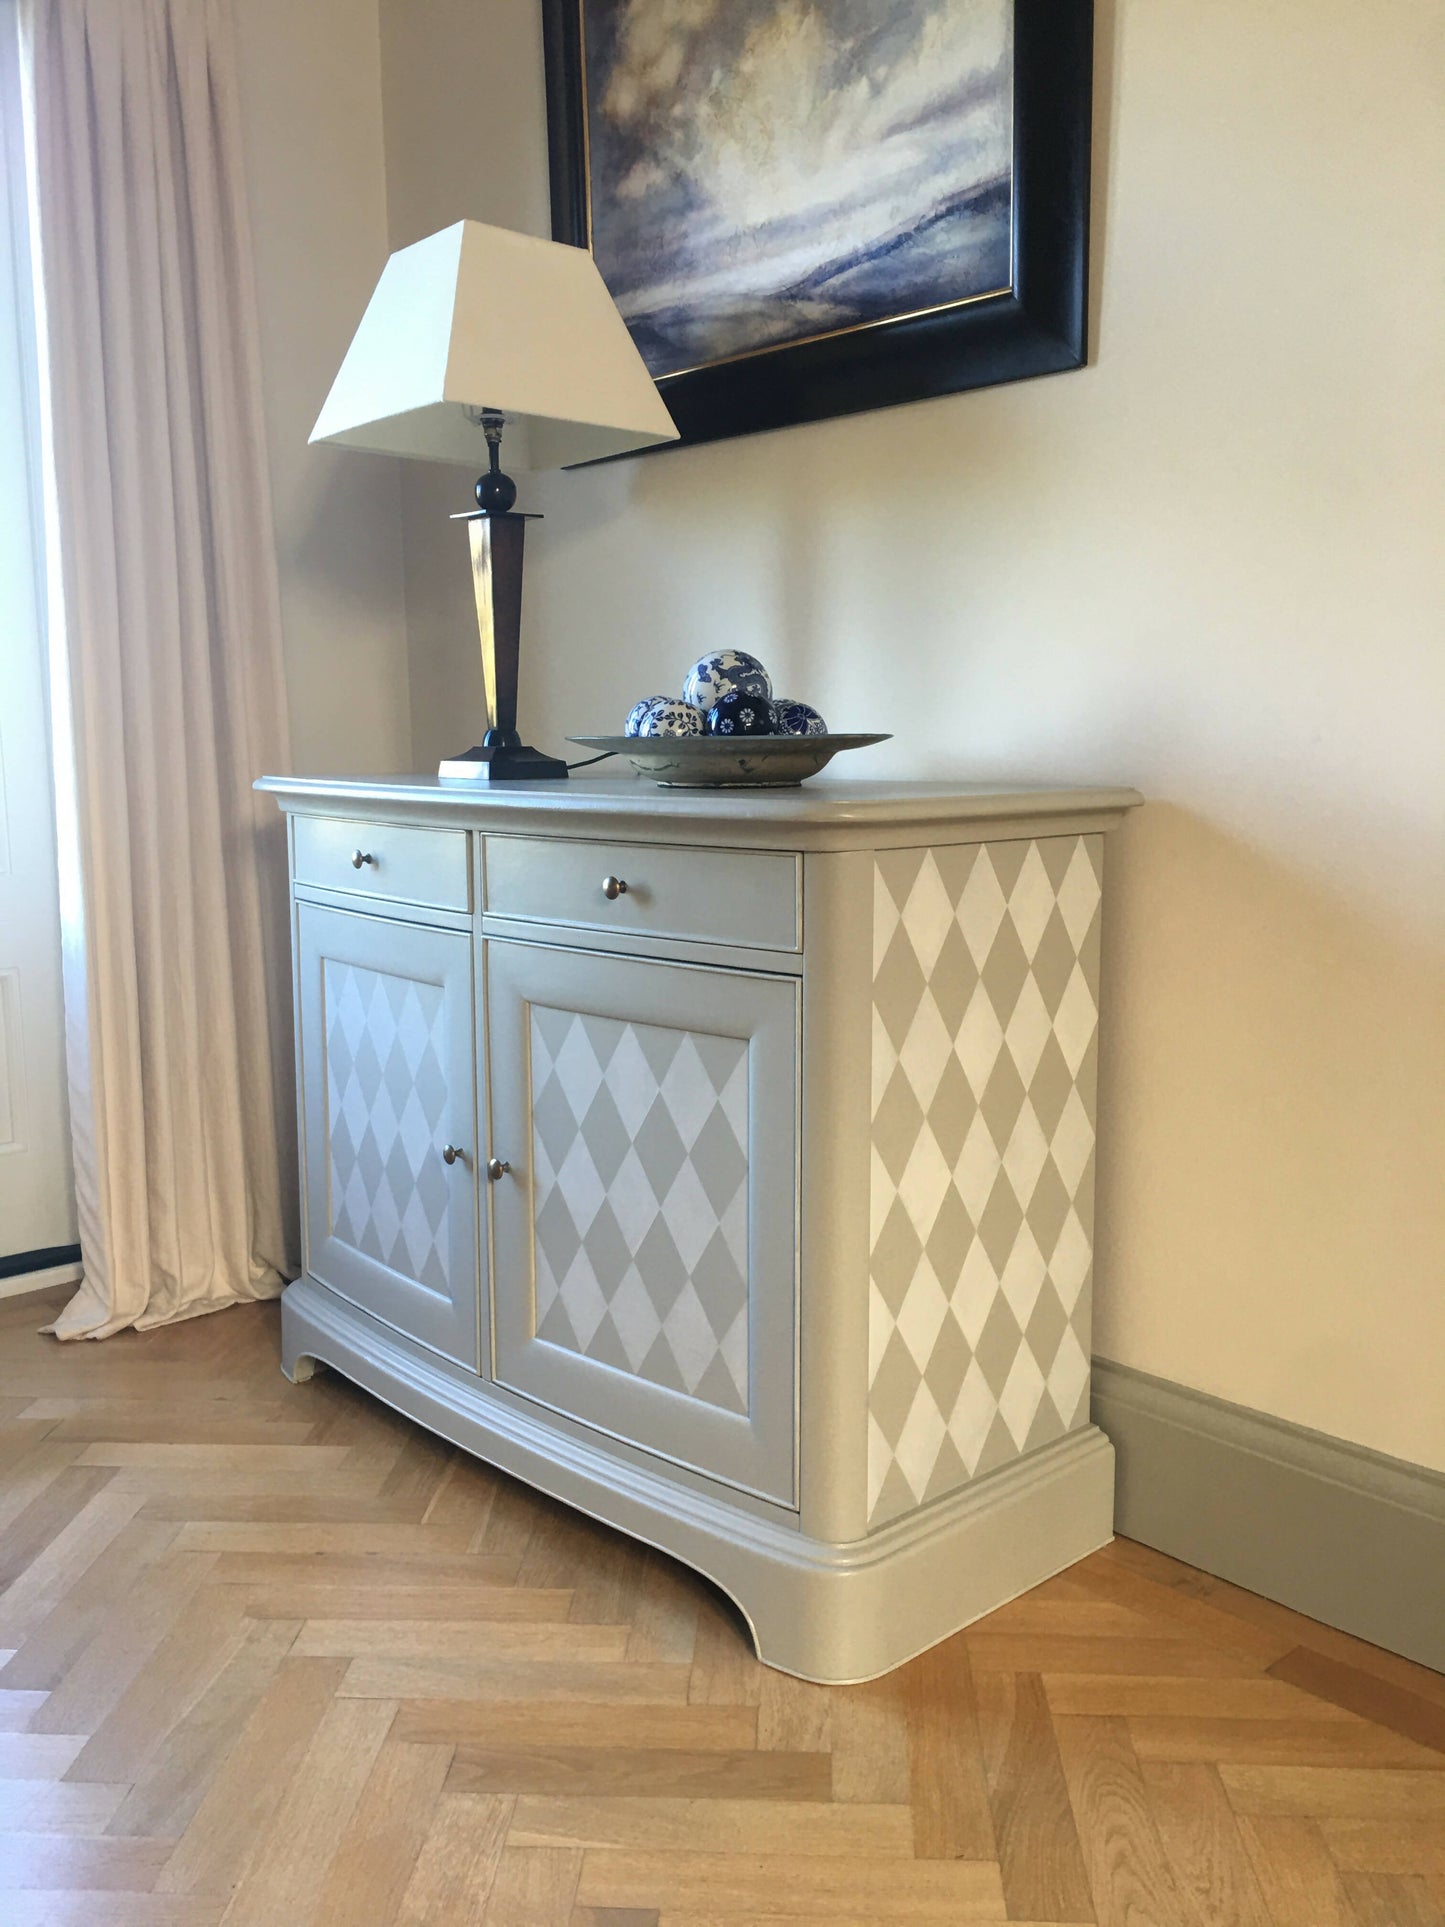 Sideboard. Gustavian Style. White and Grey, handpainted harlequin design (Farrow & Ball paint). Willis & Gambier. Solid wood.